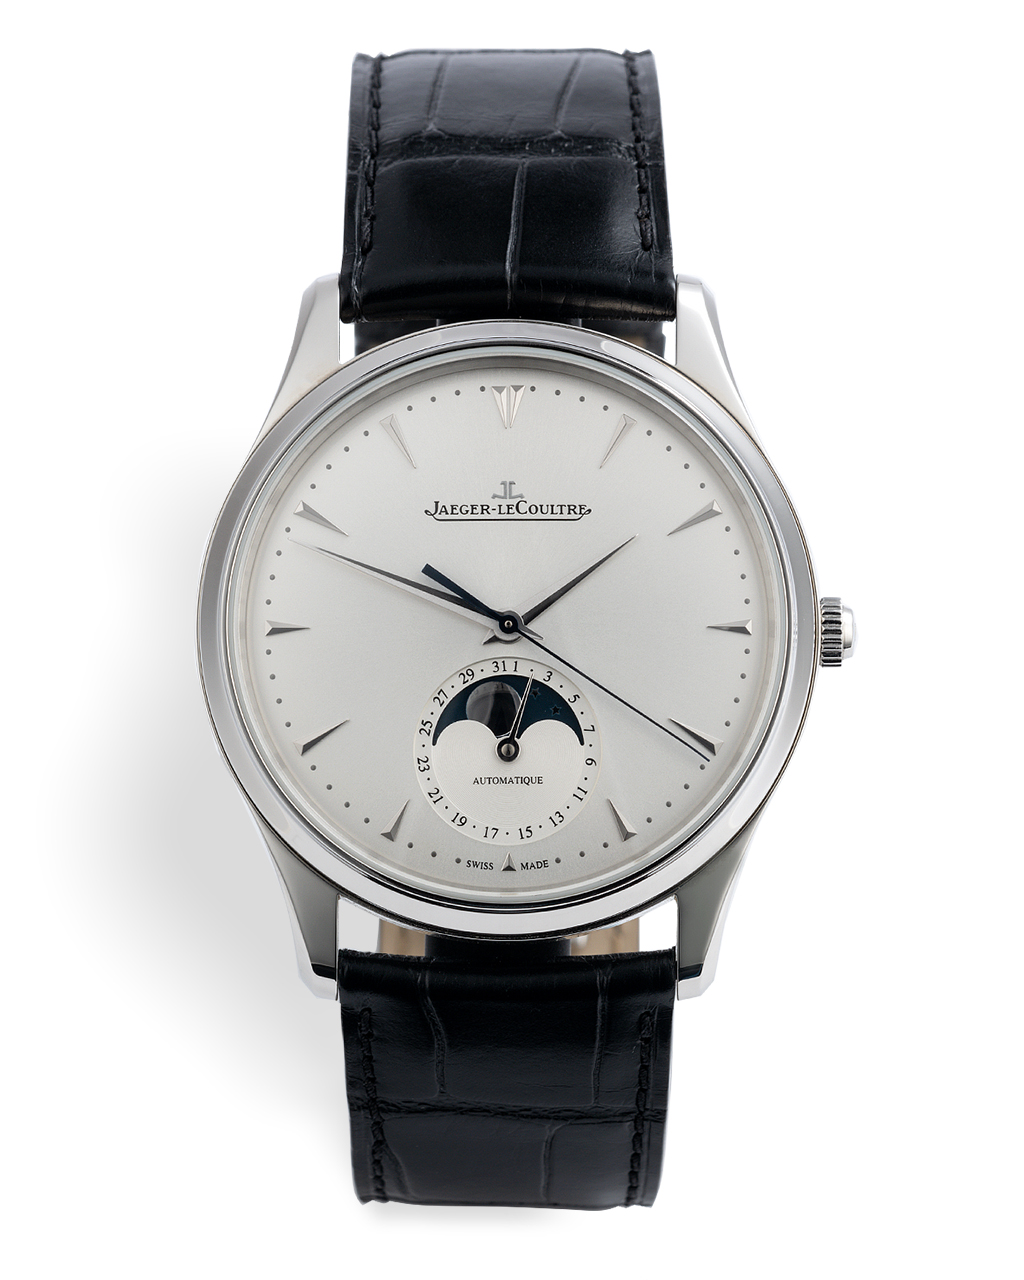 Jaeger-leCoultre Master Moon Watches | ref JLQ1368420 | Complete Set ...